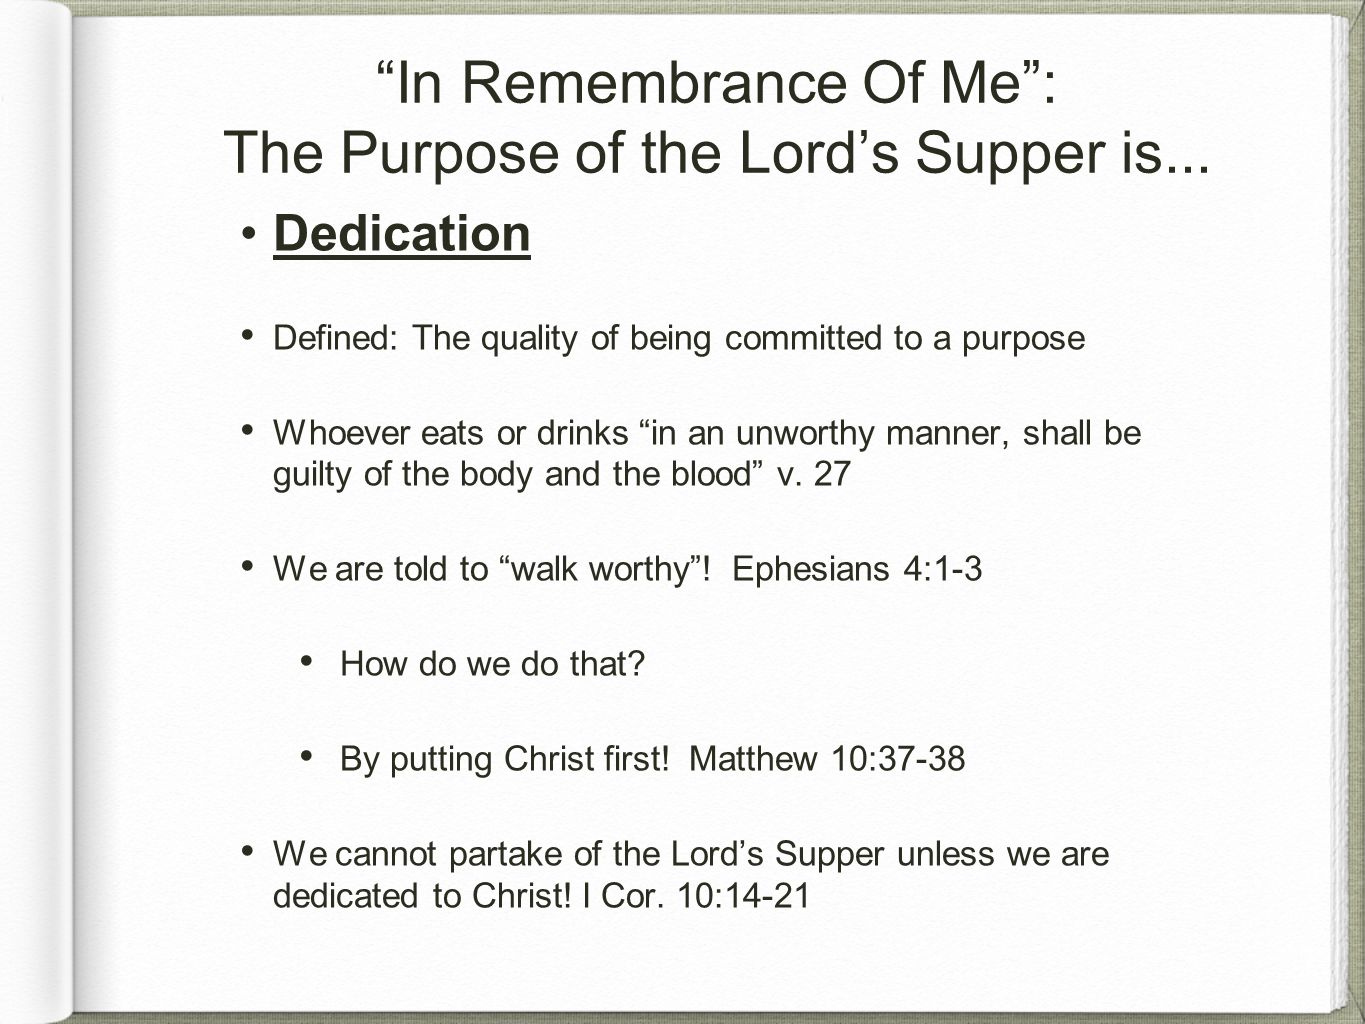 In Remembrance Of Me : The Purpose of the Lord’s Supper is...